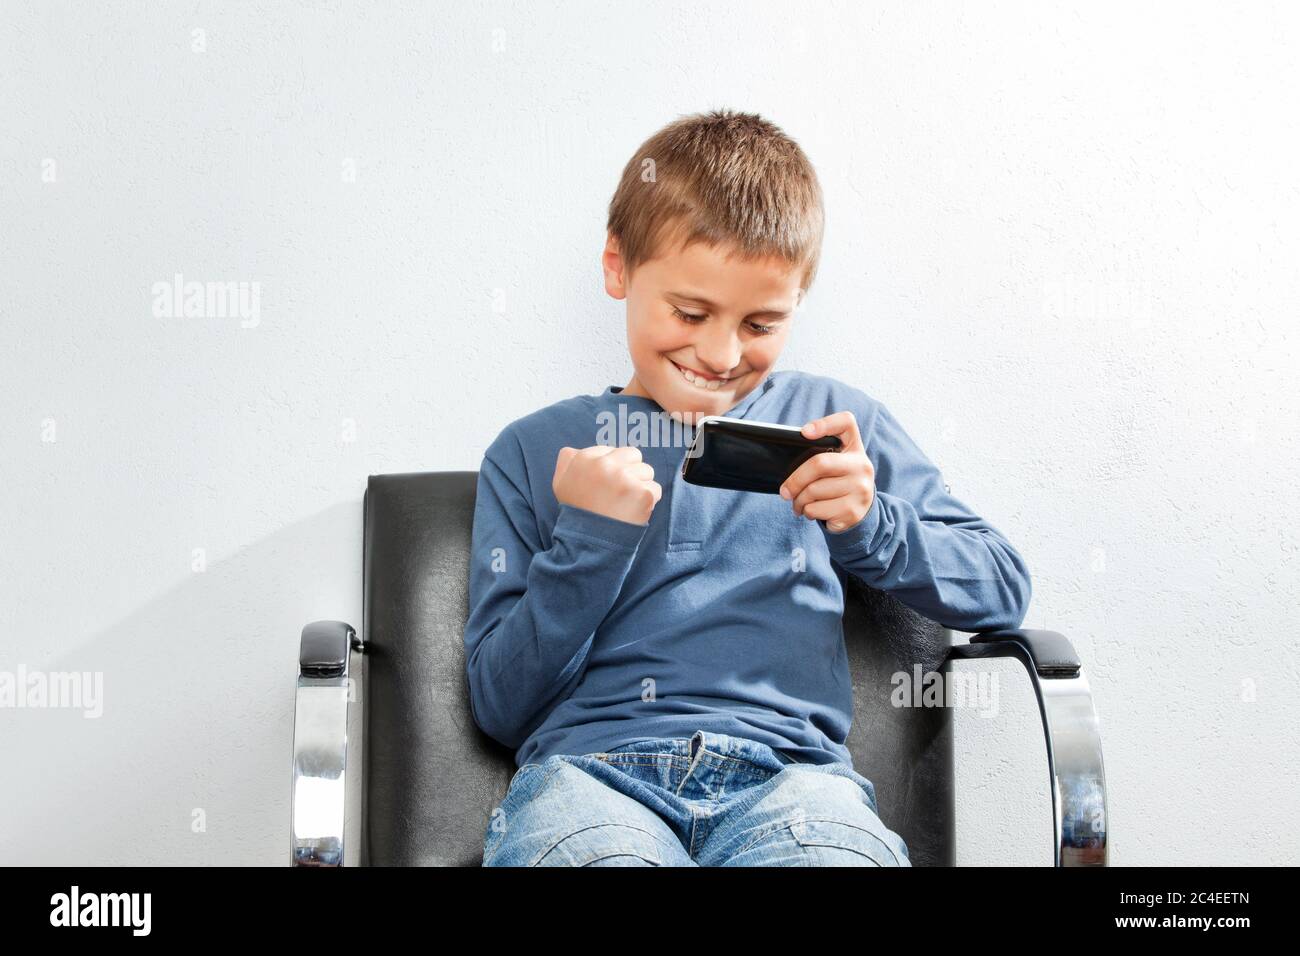 Child wins in mobile game on a smartphone Stock Photo